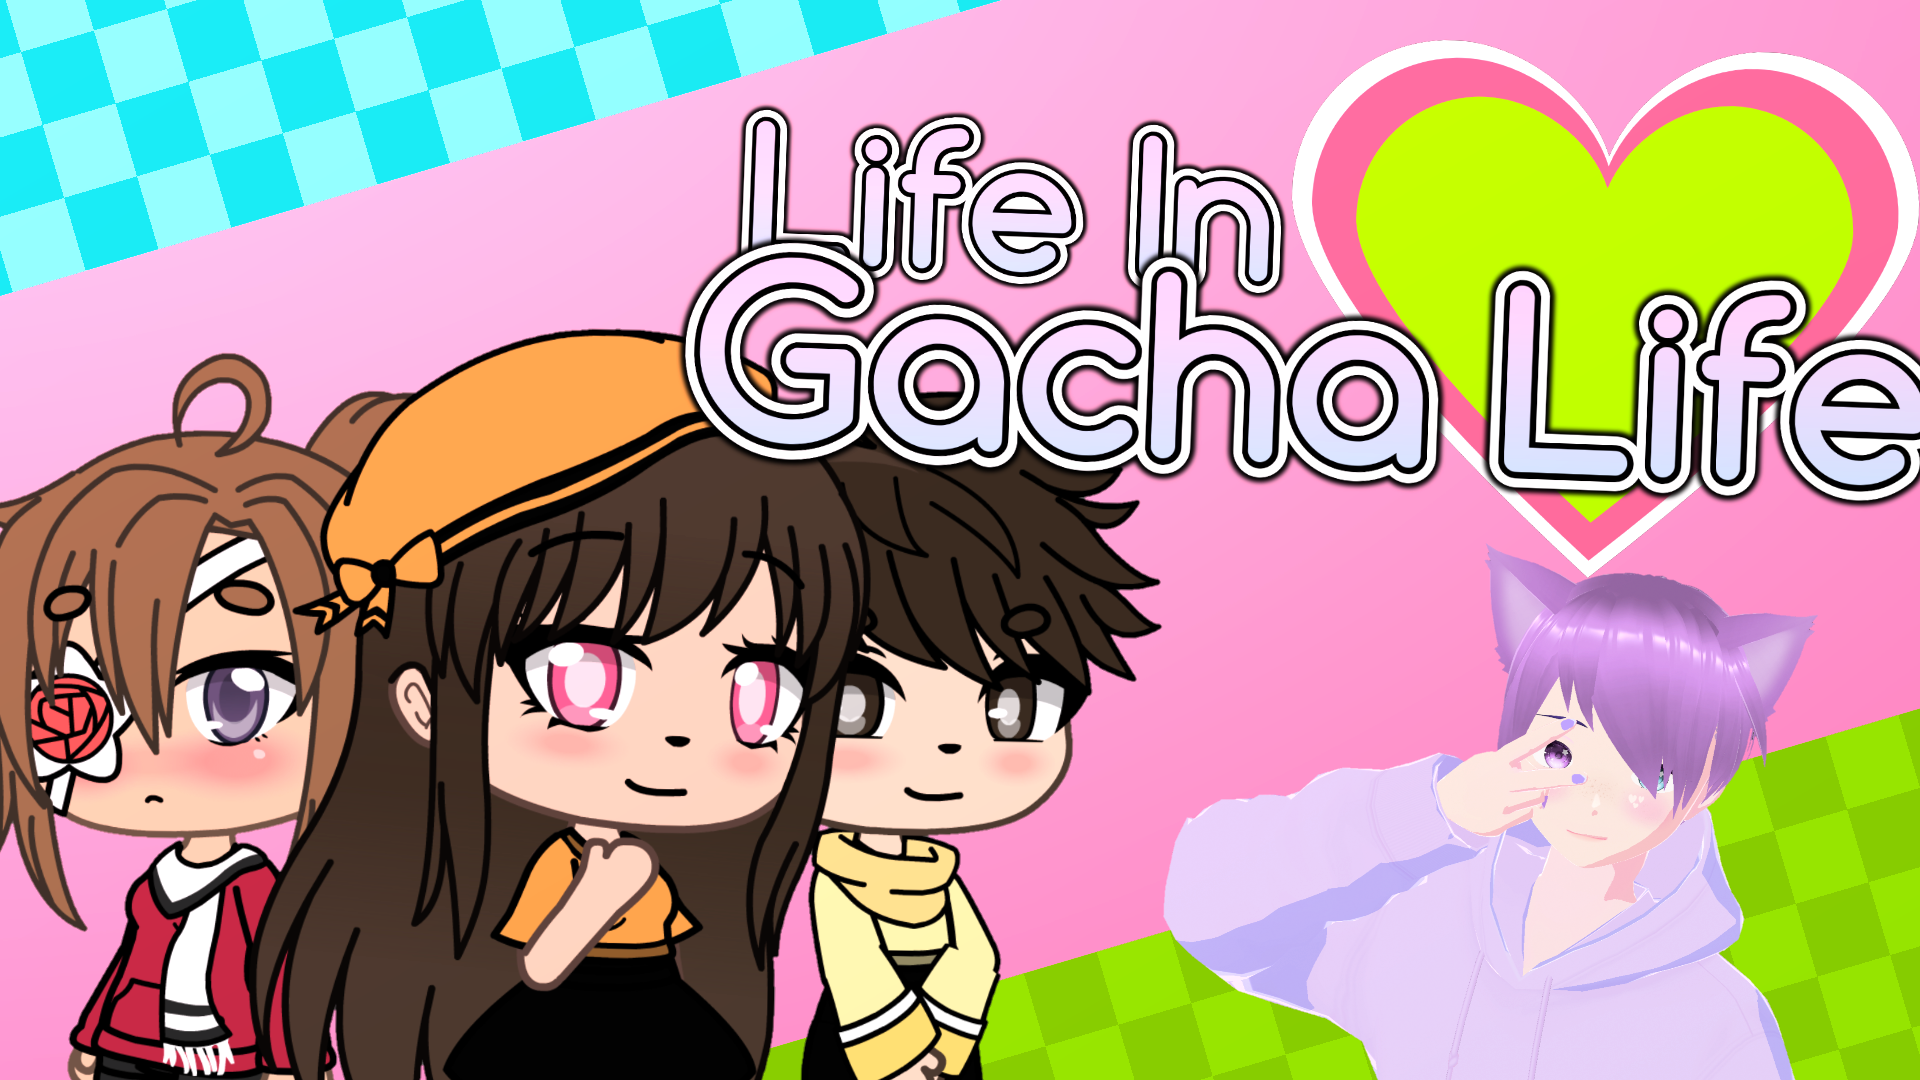 Gacha Life 2 APK (Android Game) - Free Download